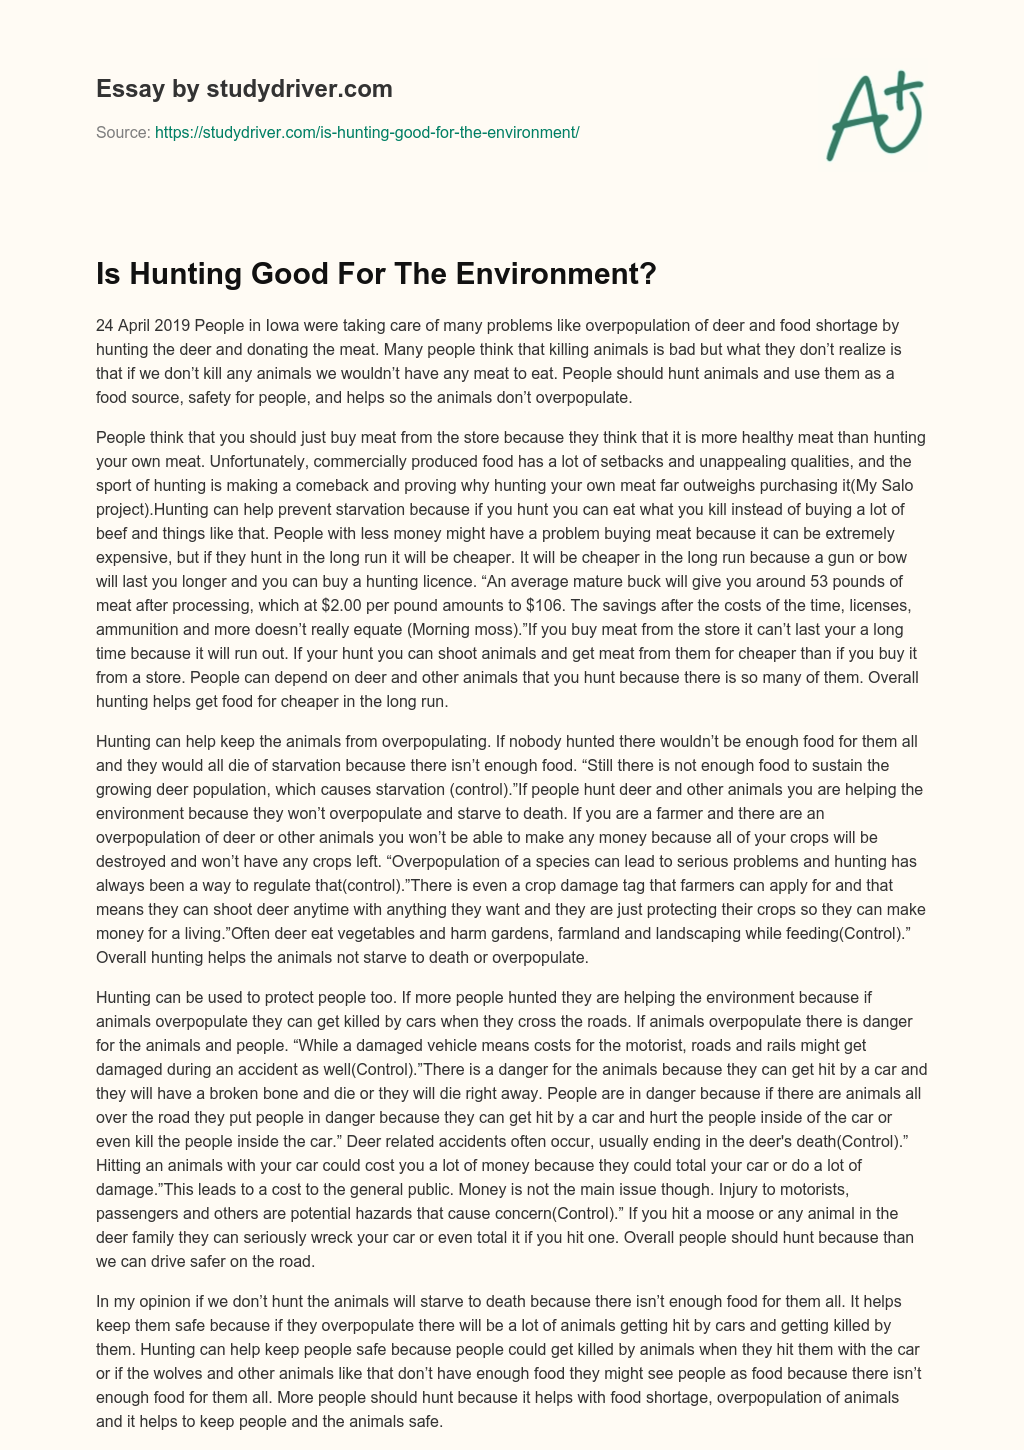 Is Hunting Good for the Environment? essay